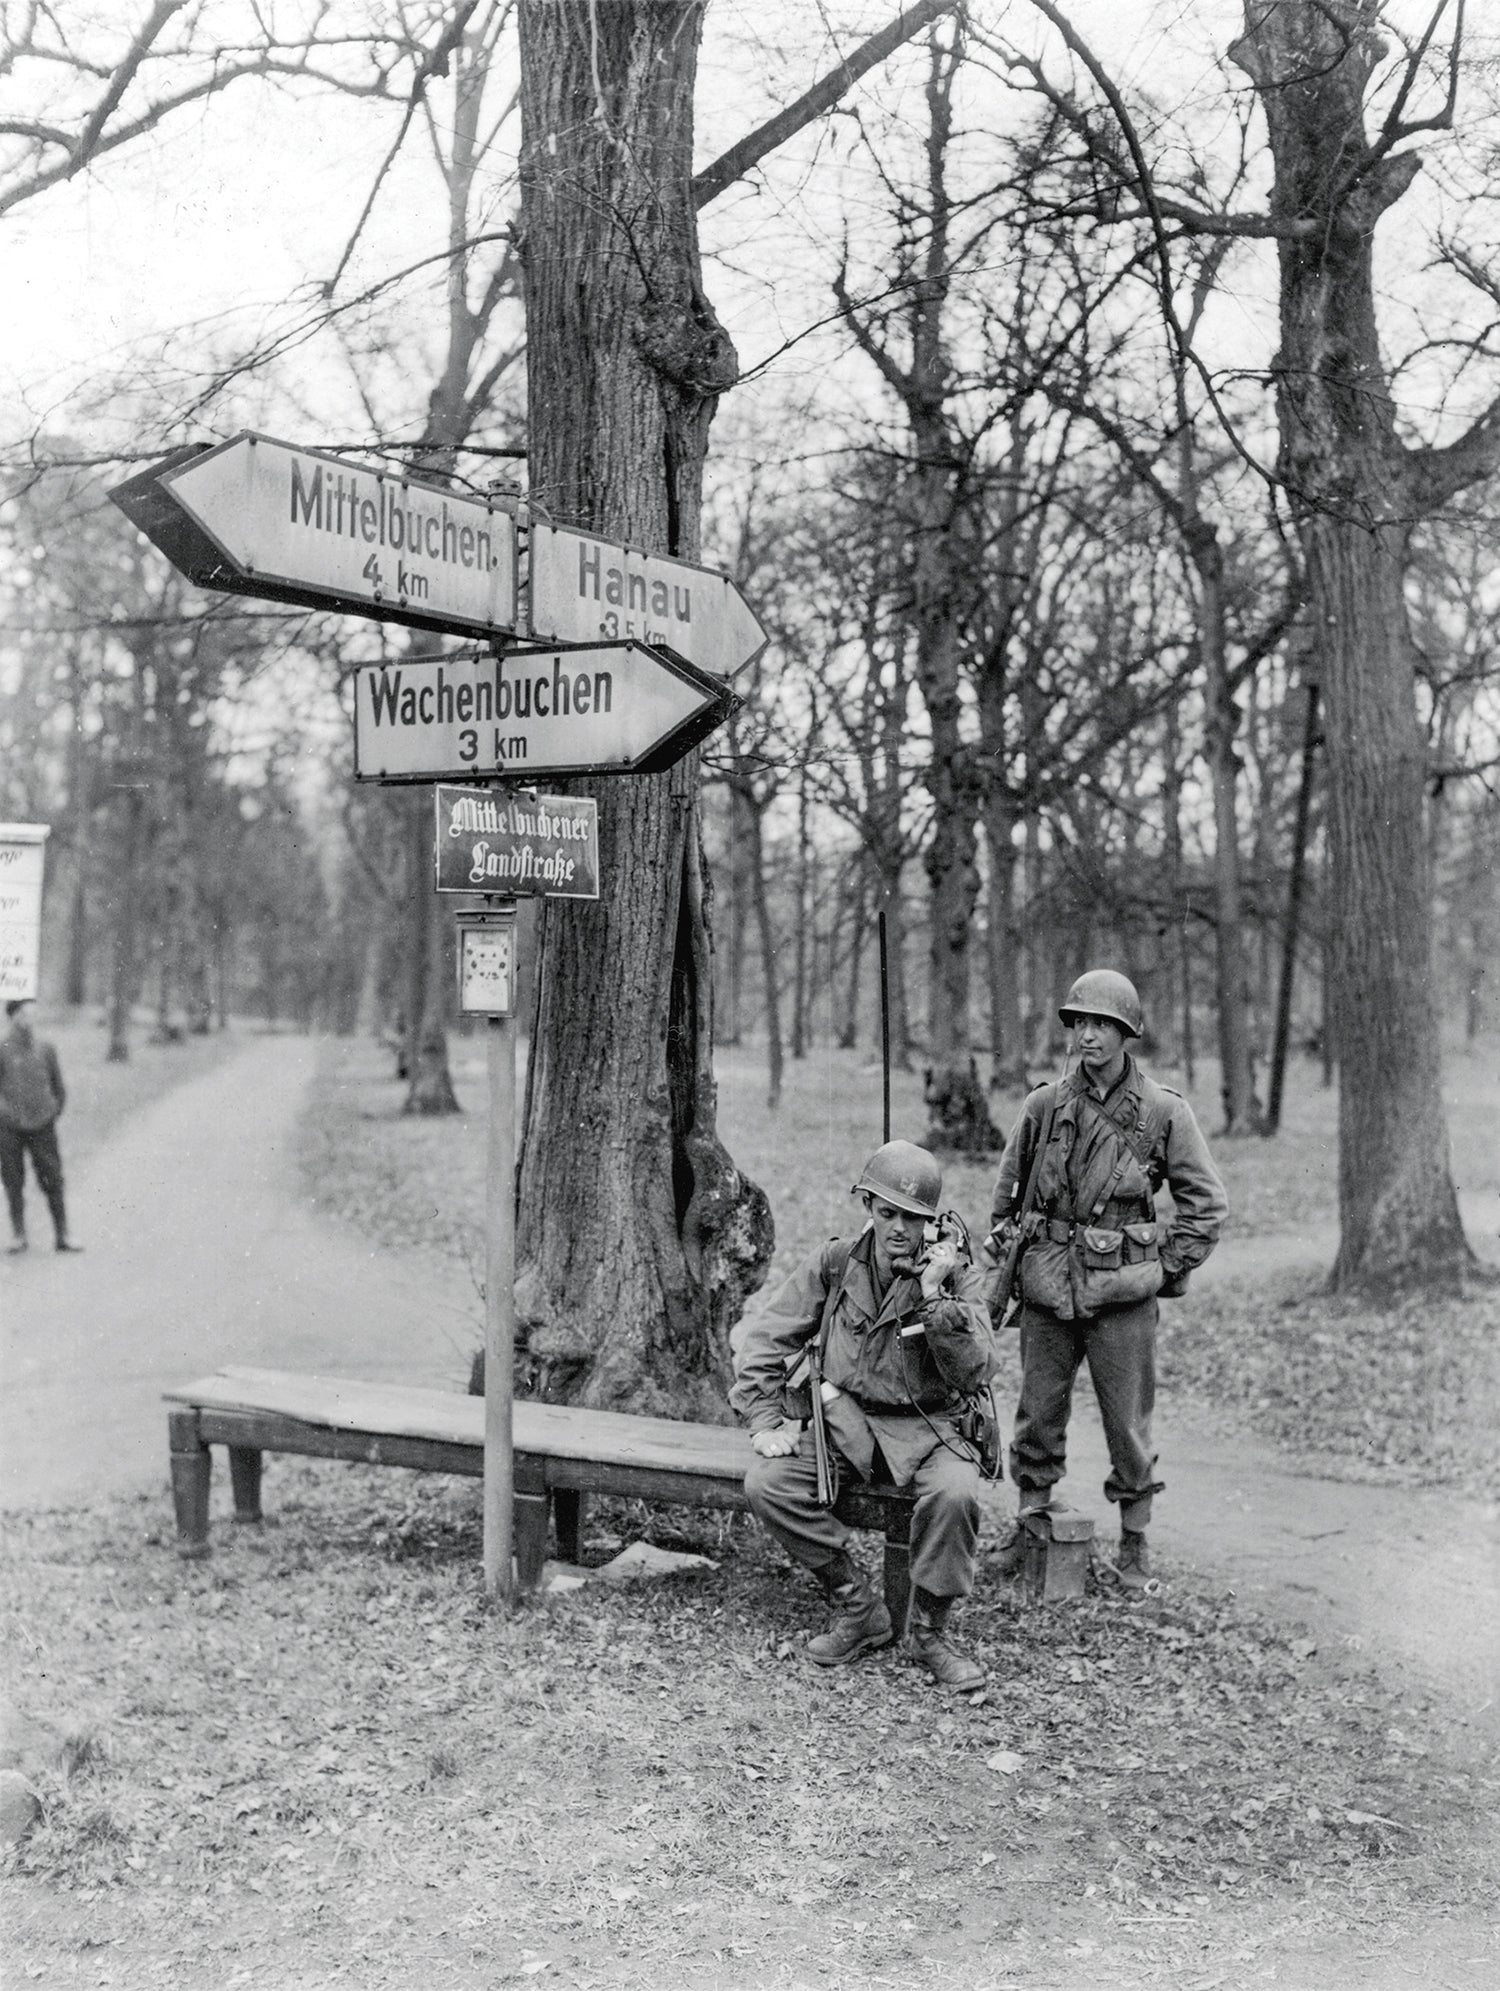 Soldiers from the 358th Infantry Regiment, 90th Infantry Division, test their radios in March 1945 in Germany. (Credit: U.S. Army)